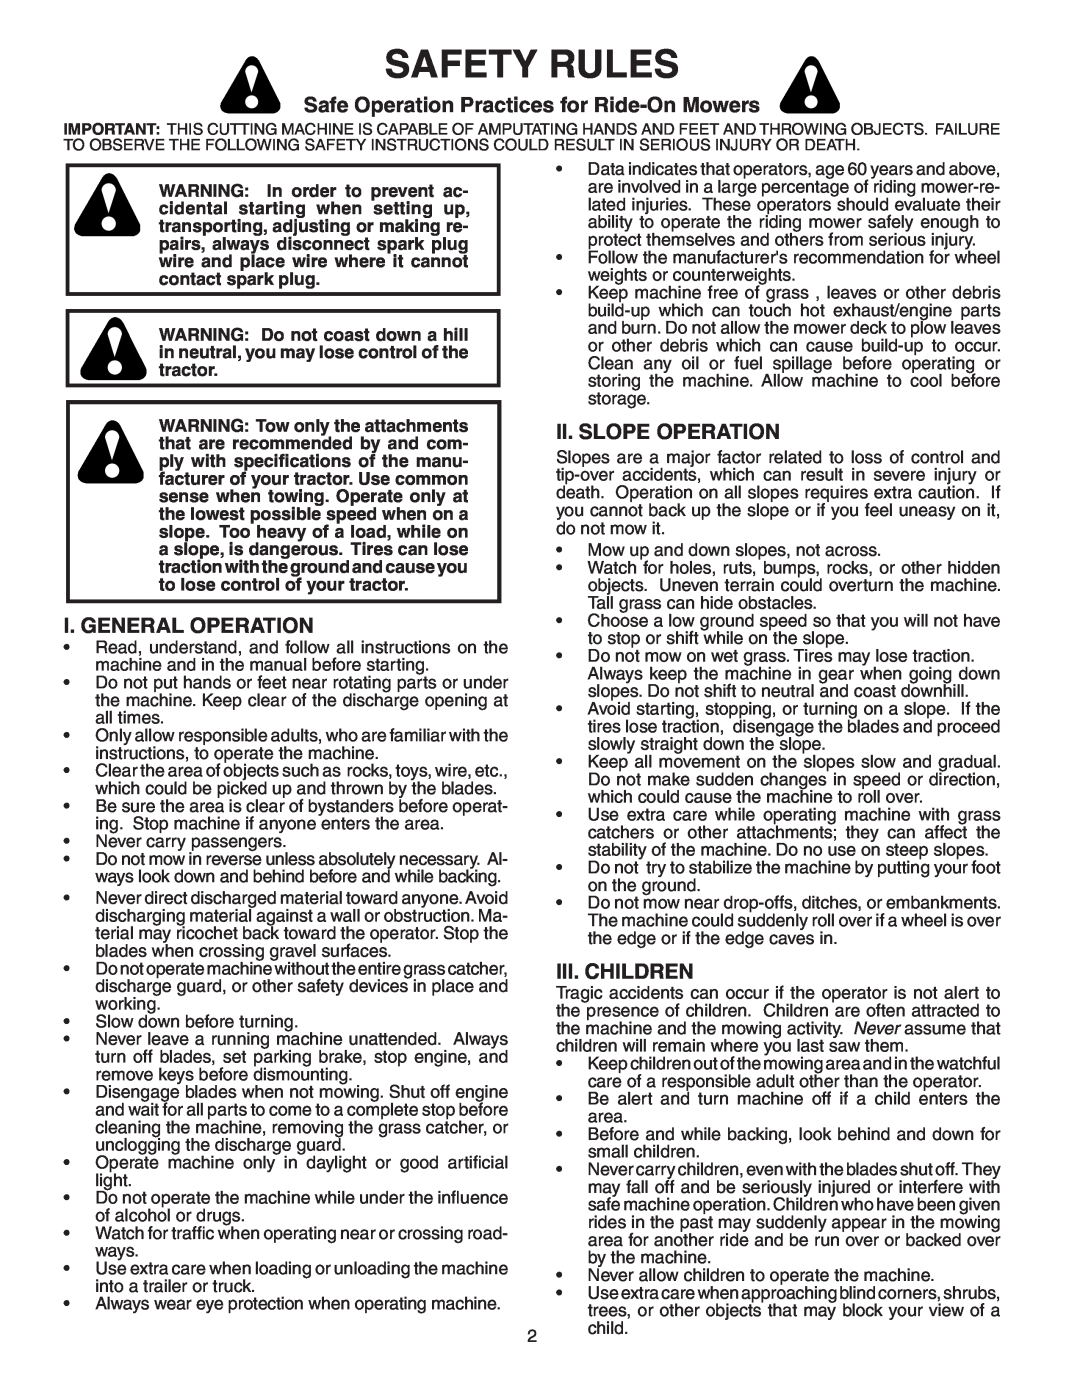 Poulan 960 72 00-12 Safety Rules, Safe Operation Practices for Ride-On Mowers, I. General Operation, Ii. Slope Operation 